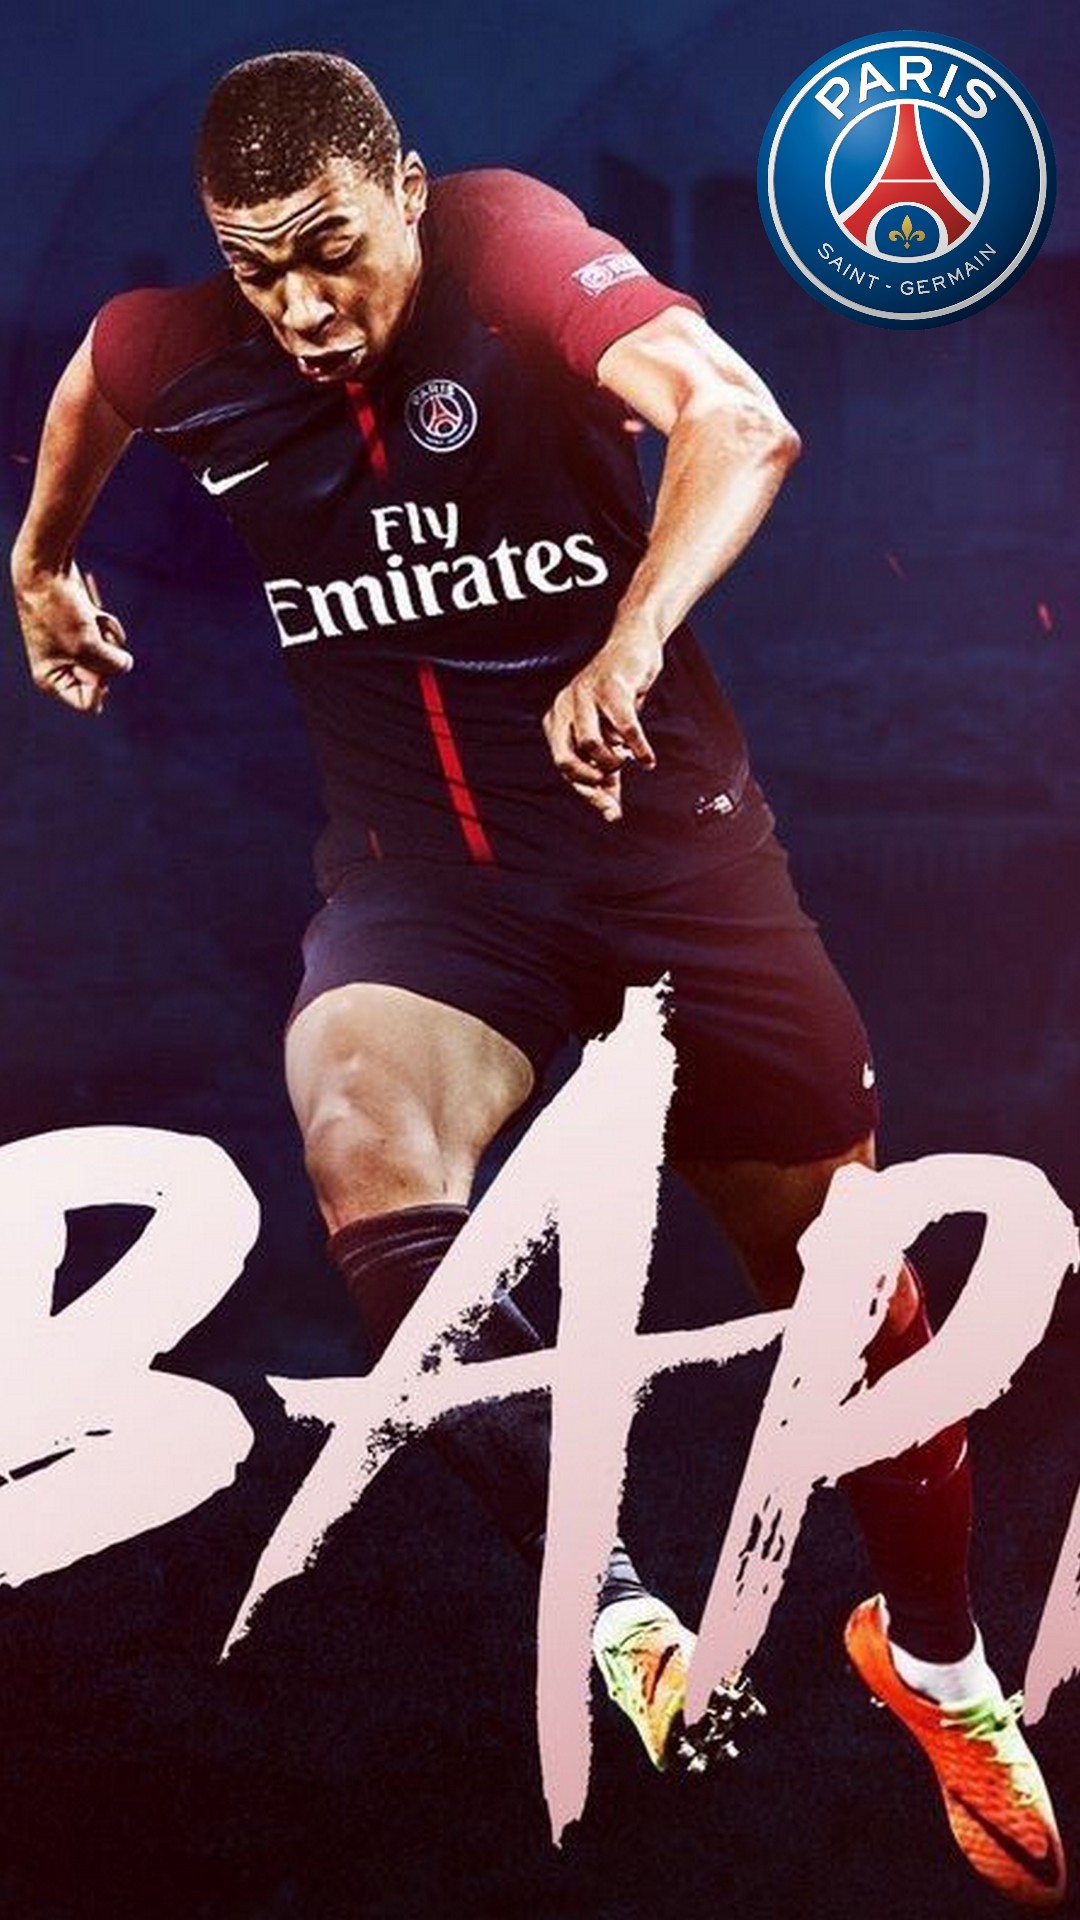 Mbappe Paris Saint-Germain HD Wallpaper For iPhone with resolution 1080x1920 pixel. You can make this wallpaper for your Mac or Windows Desktop Background, iPhone, Android or Tablet and another Smartphone device